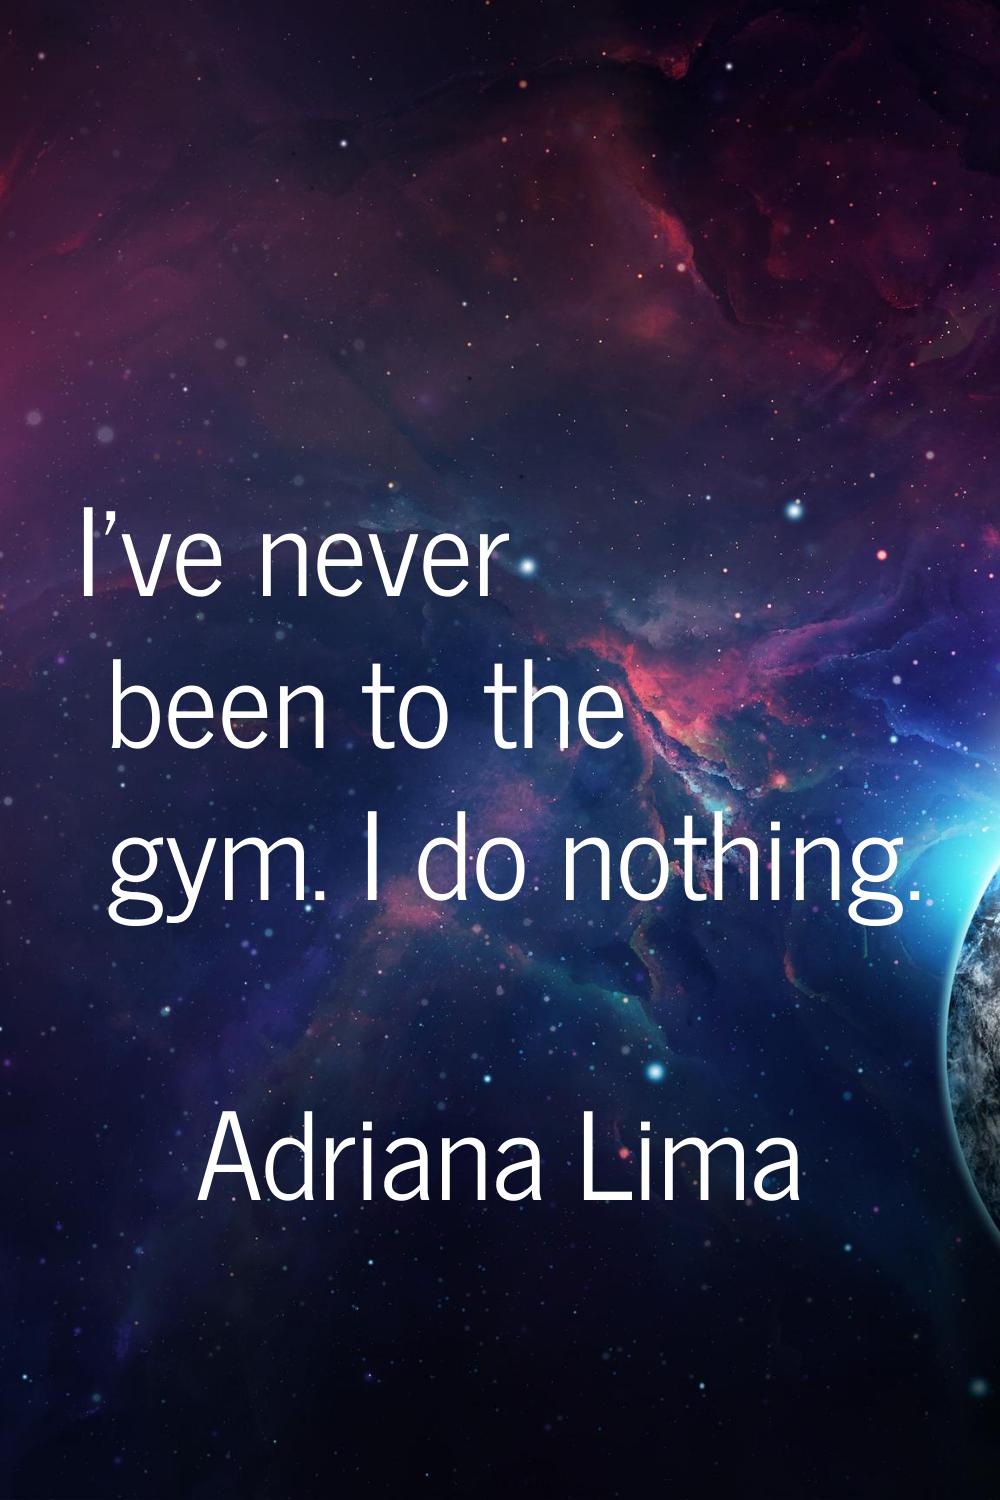 I've never been to the gym. I do nothing.